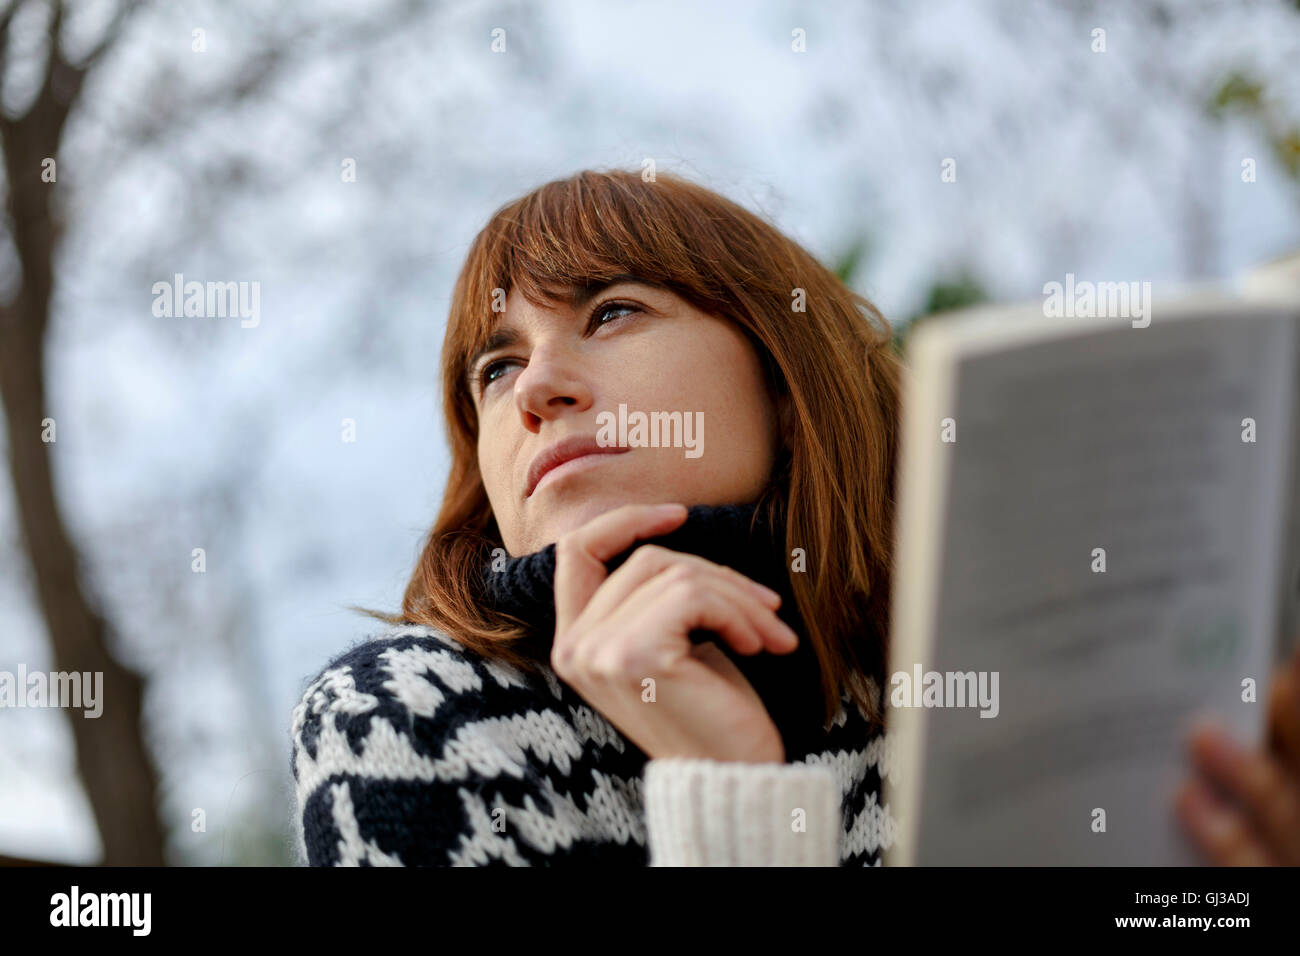 Woman holding book looking away Stock Photo